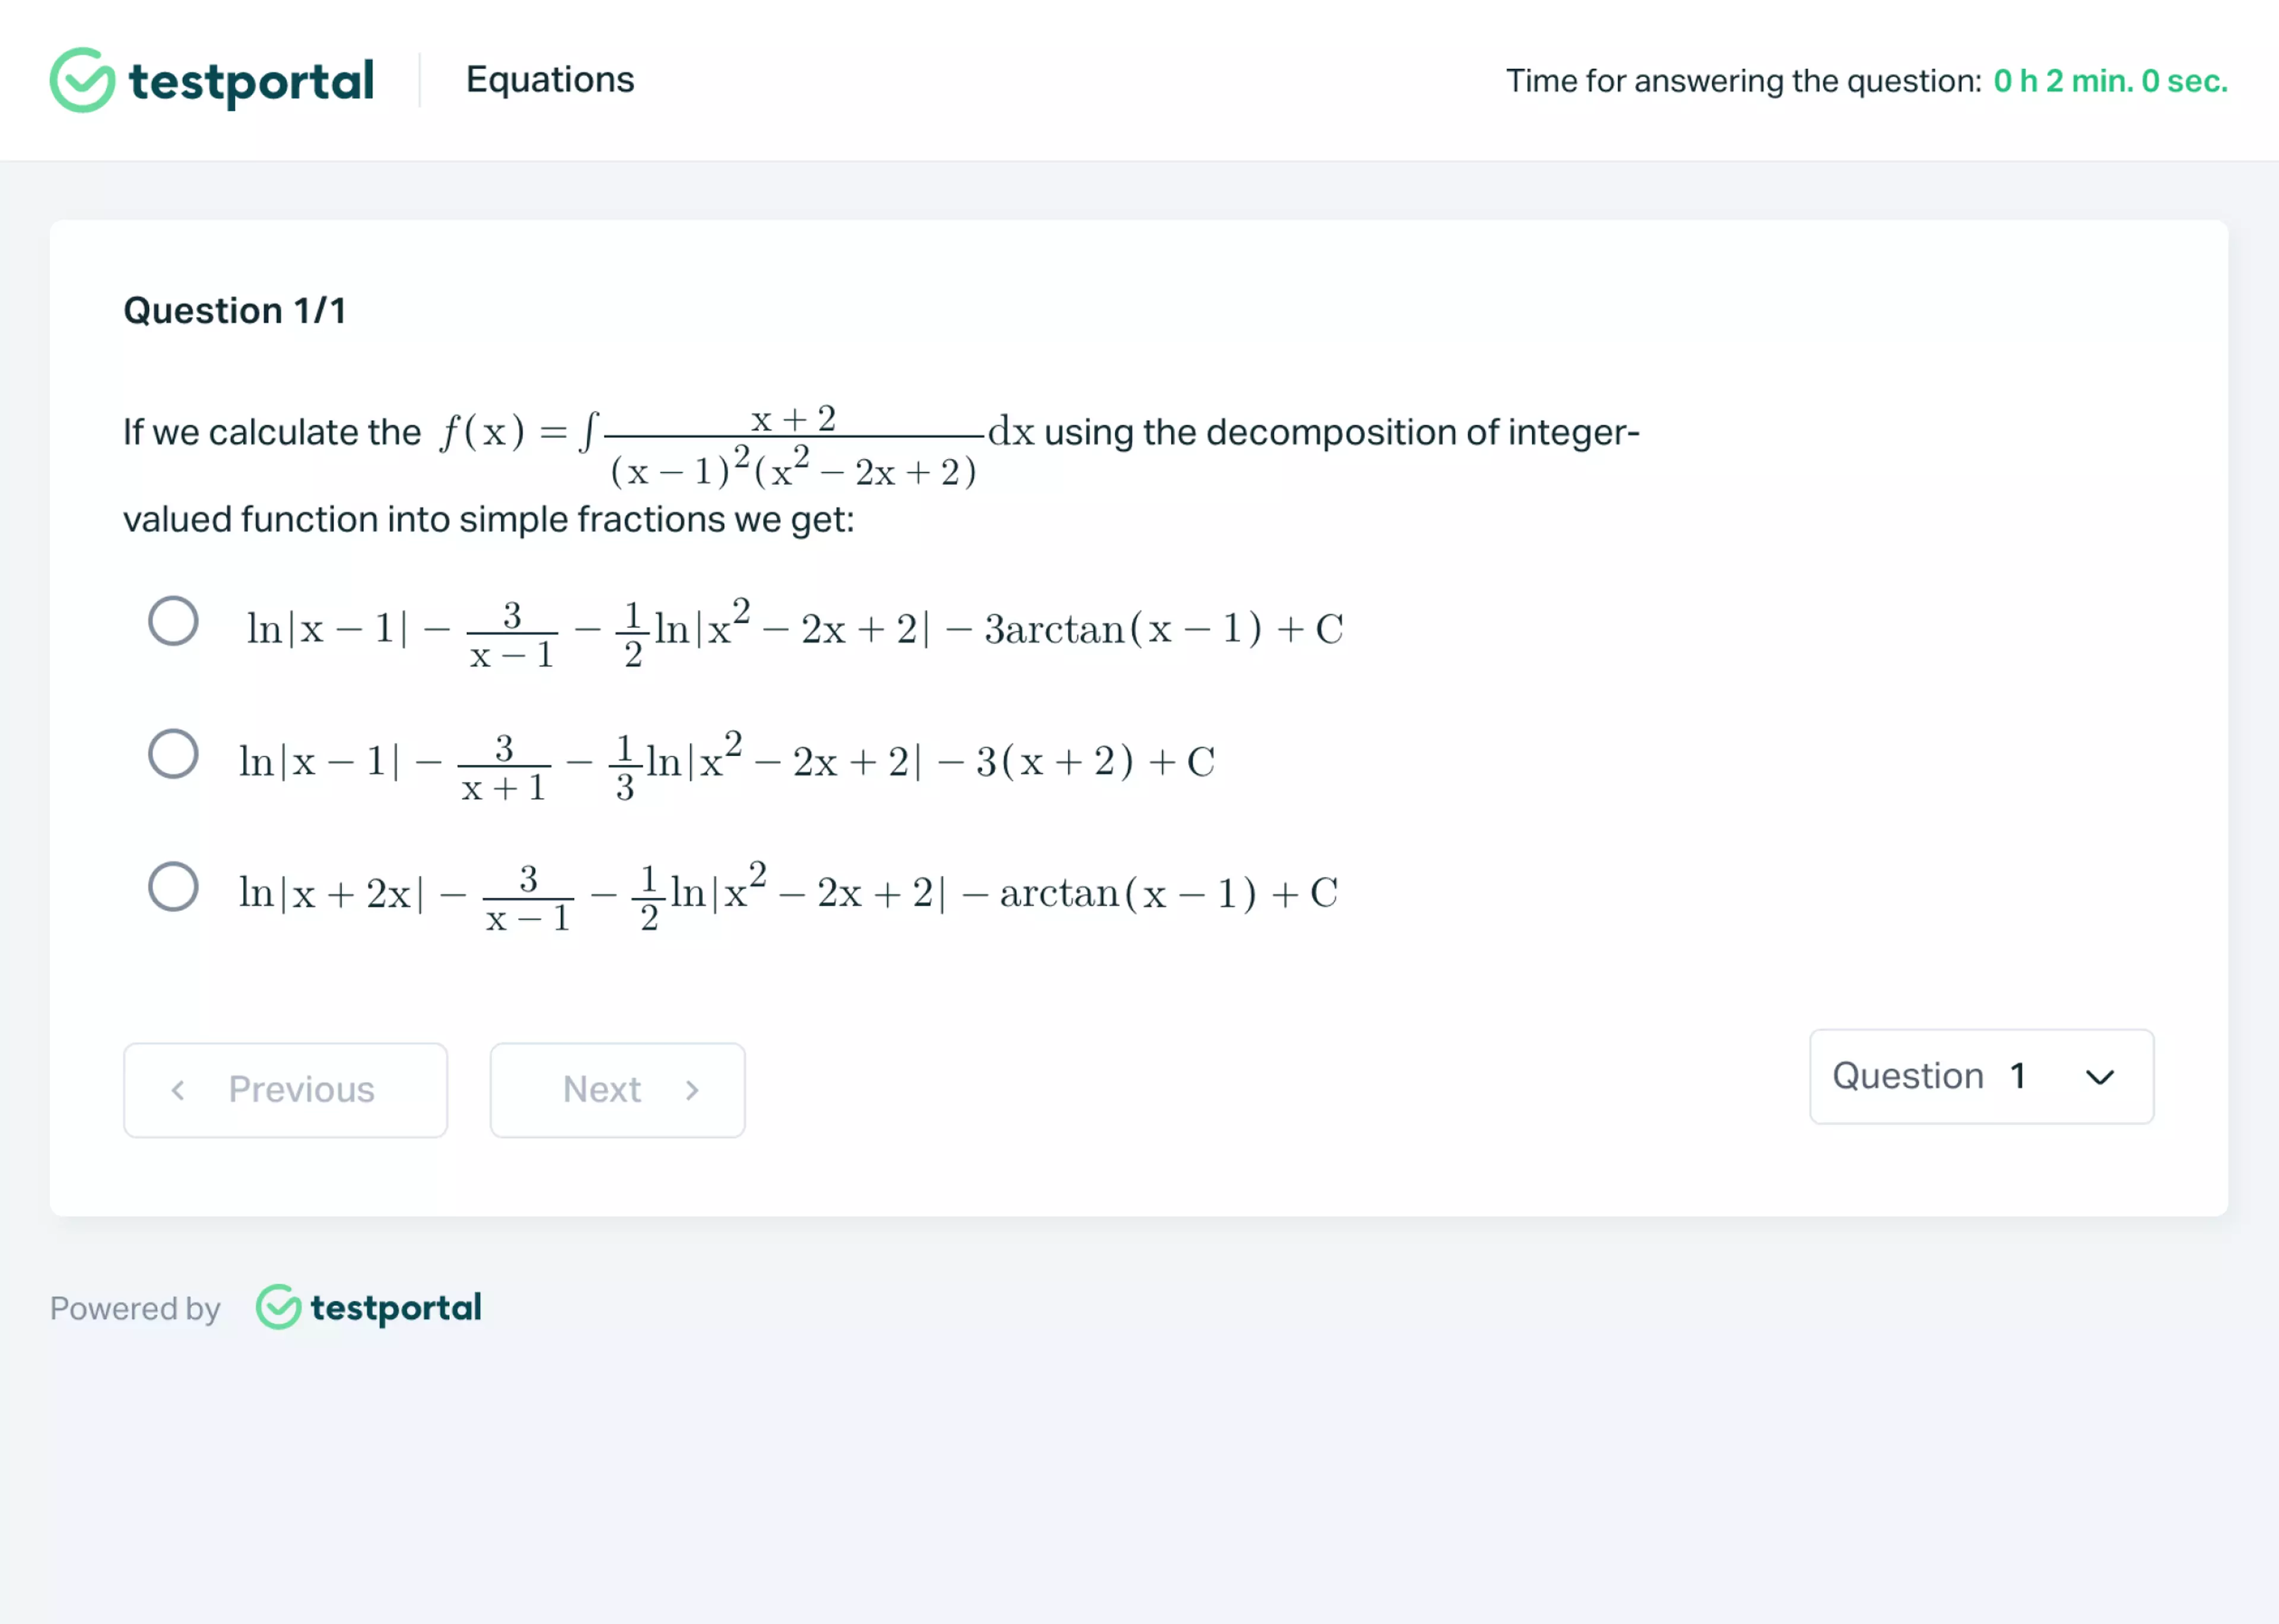 Testportal online test question with a mathematical formula and three possible answers.